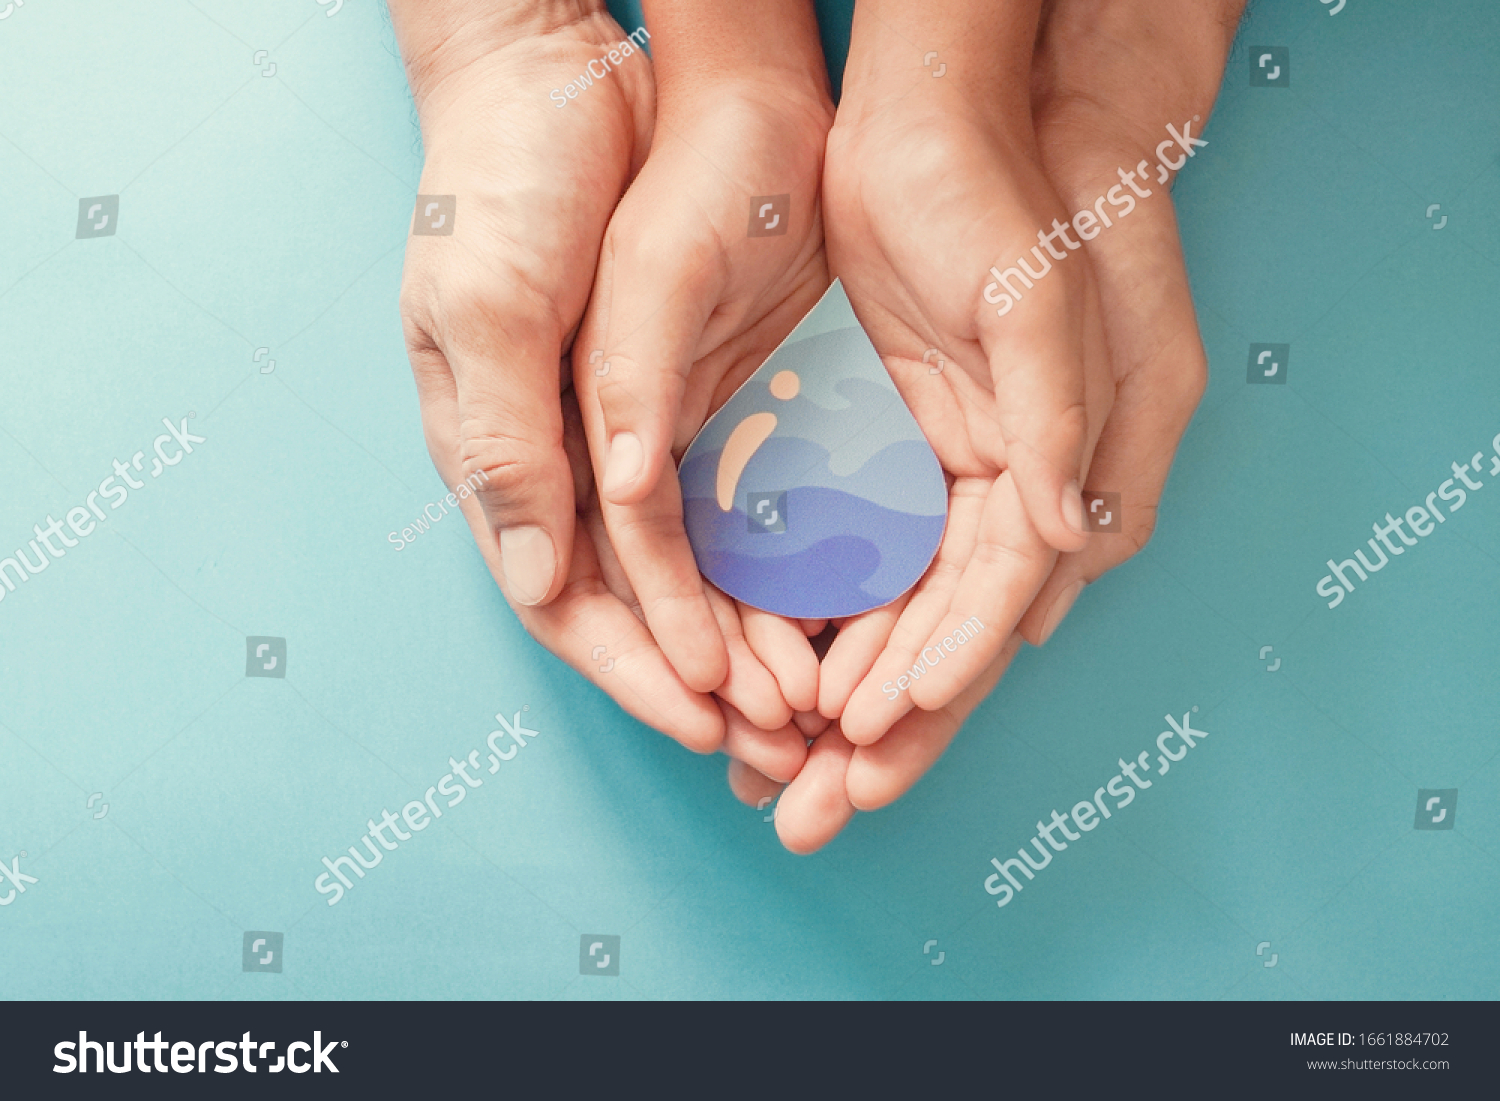 Hands holding water drop,world water day,clean water and sanitation, hand sanitizer and hygiene for covid pandemic, vaccine,family washing hands, CSR, save water, clean renewable energy concept  #1661884702